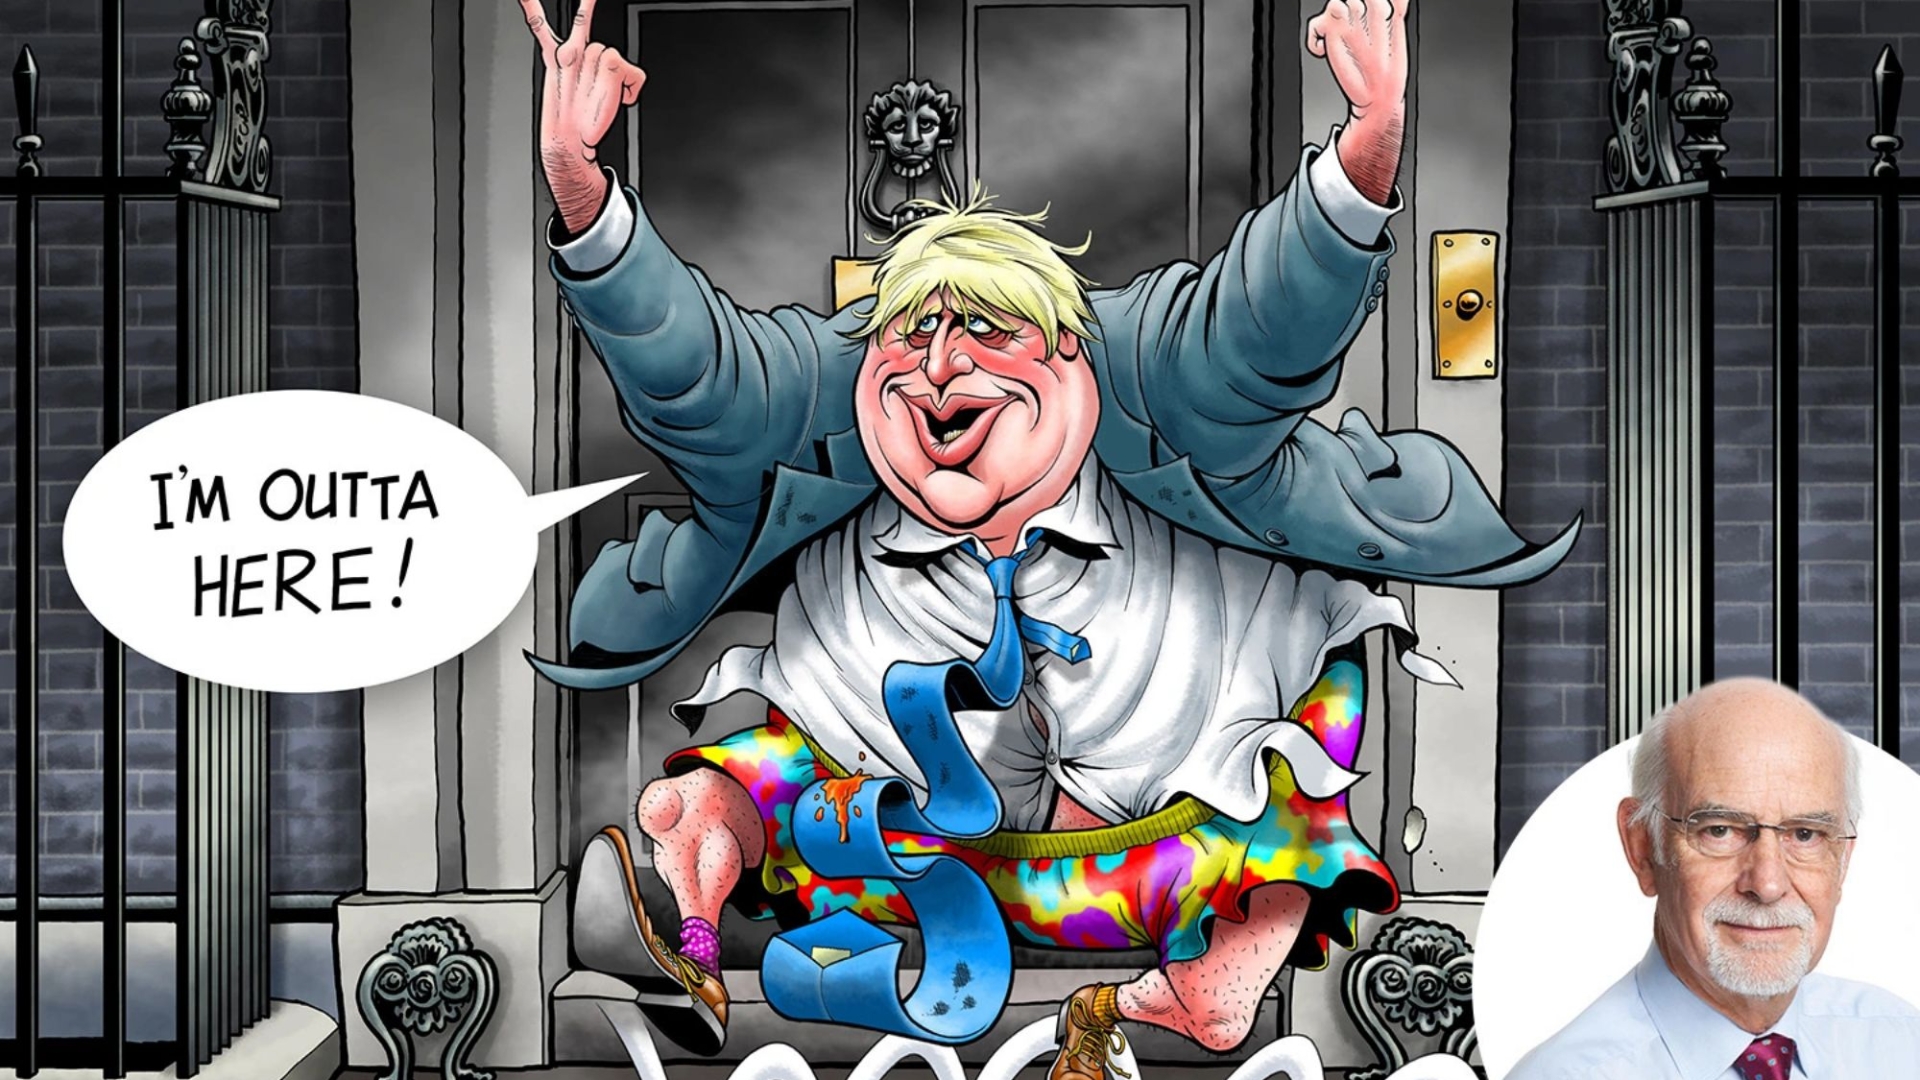 Boris Johnson was a statesmanlike man. He gave up his ego to help his country.